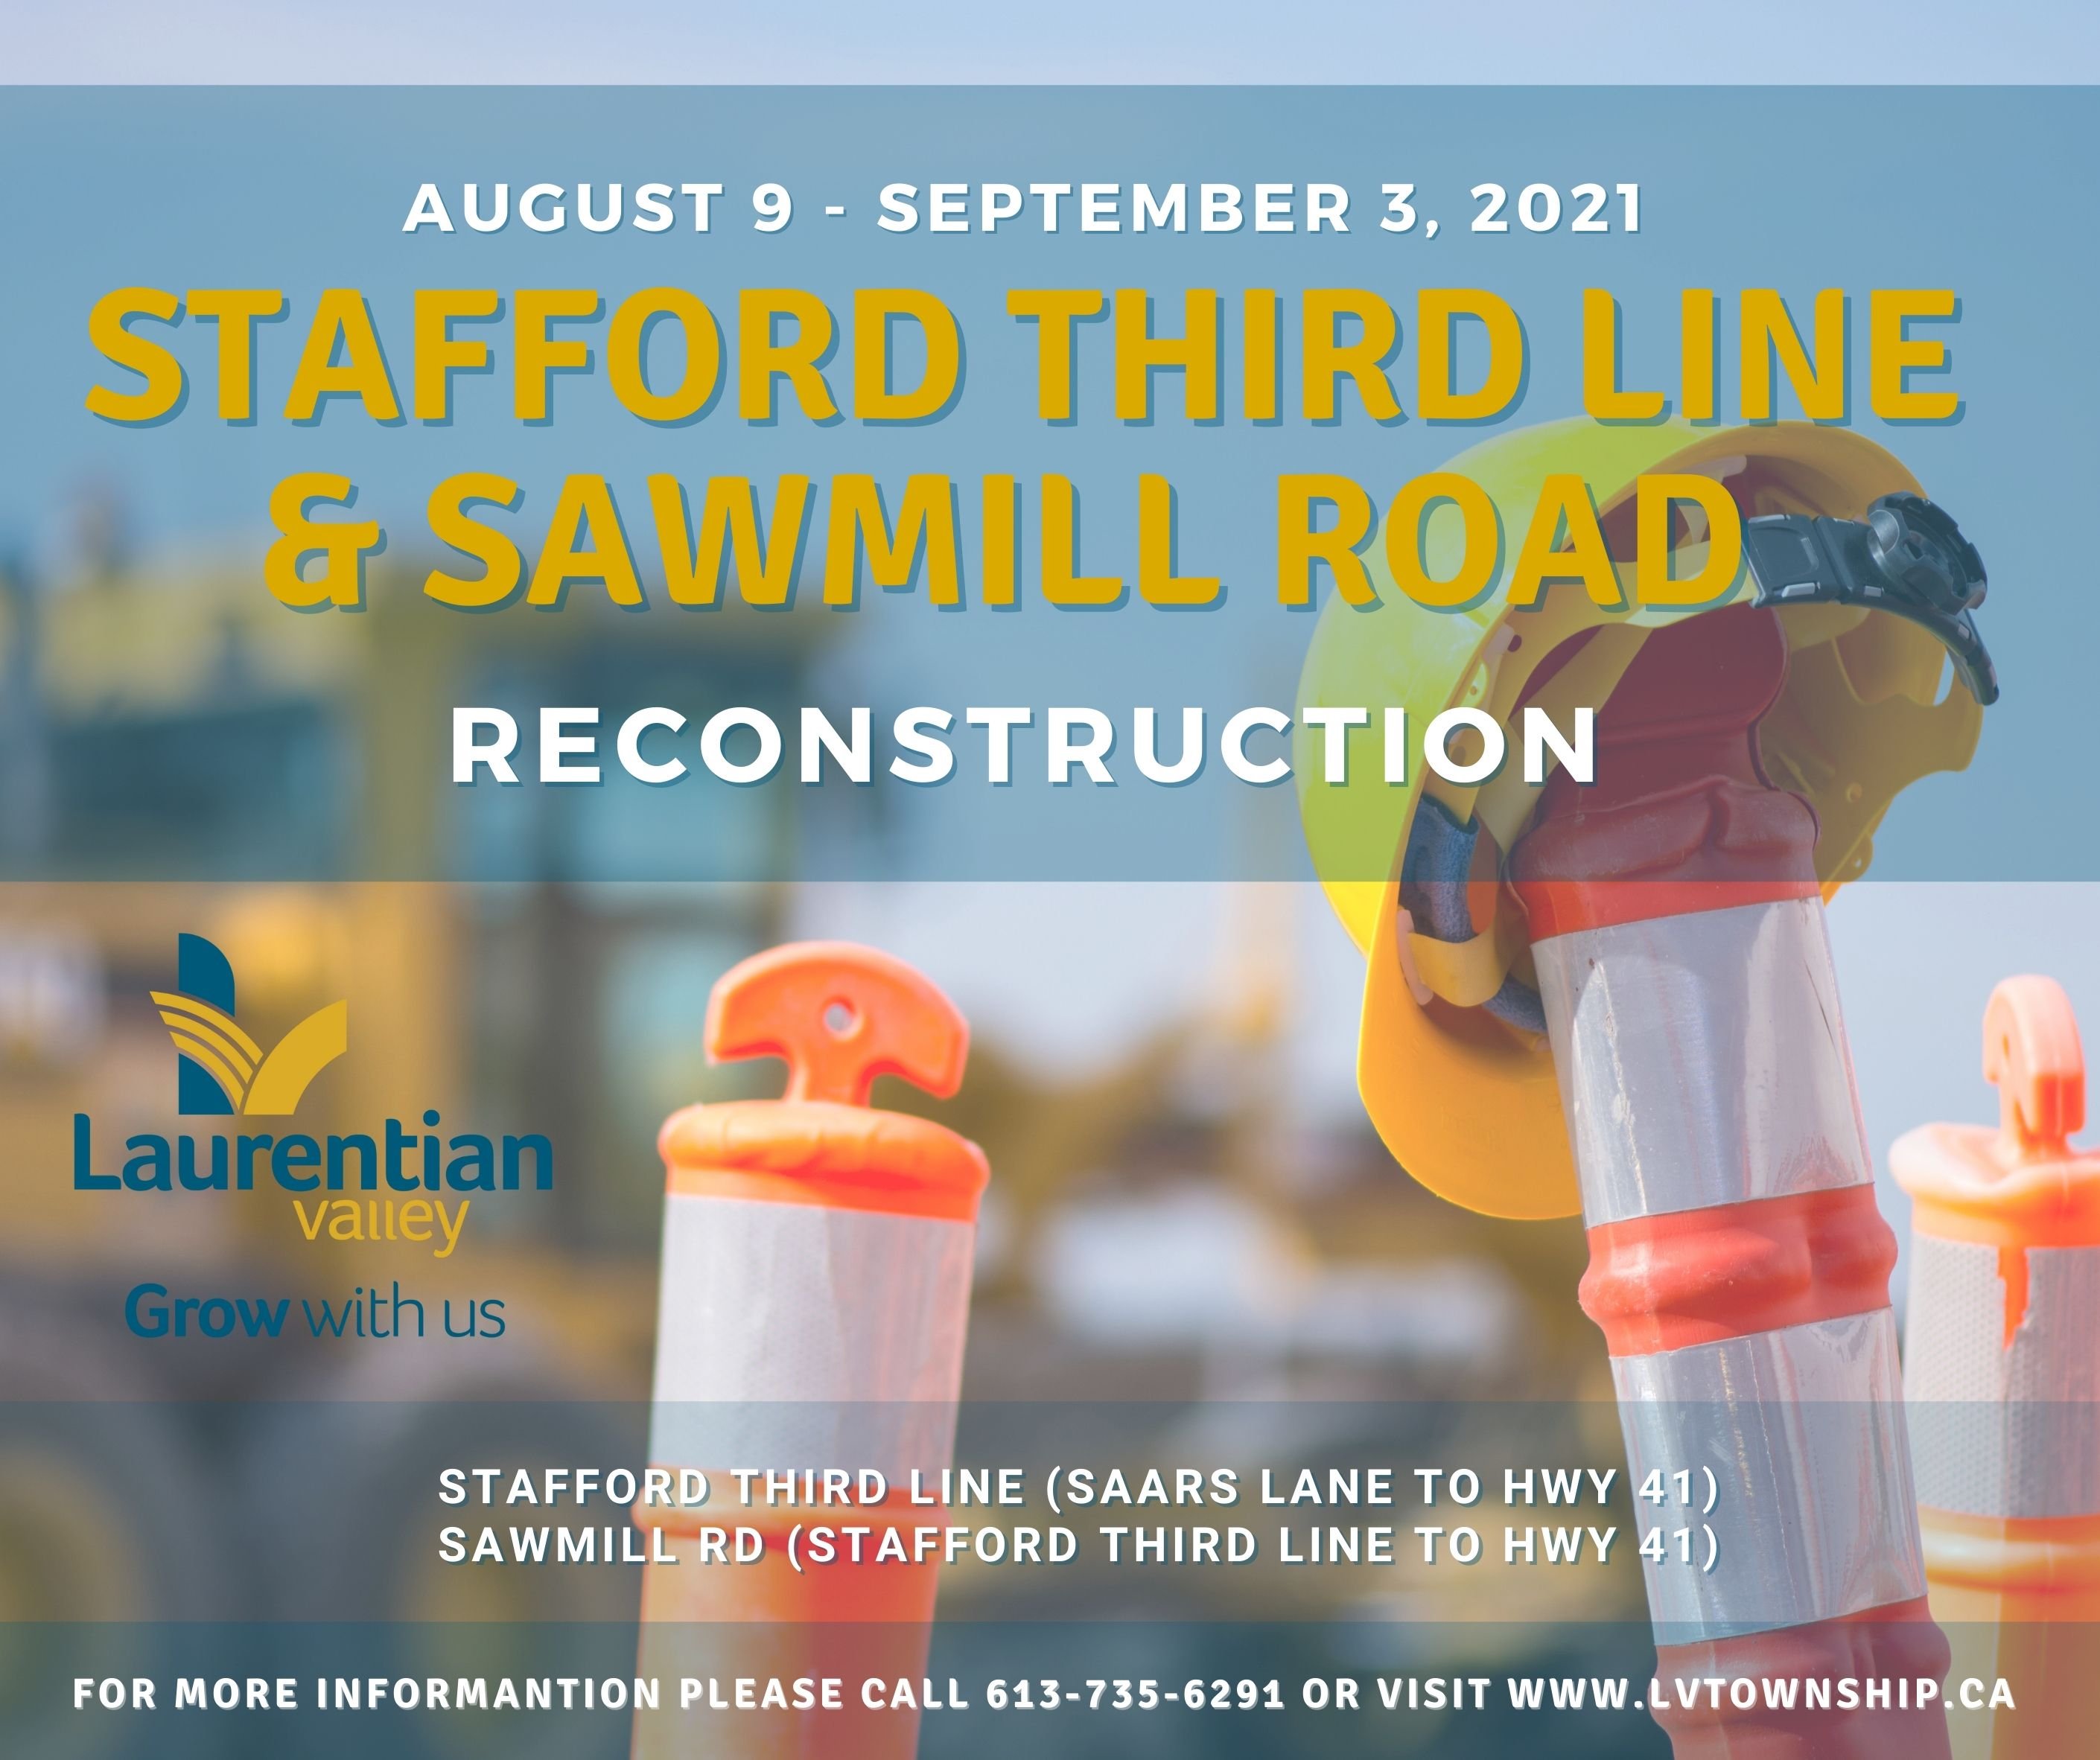 Graphic informing of Stafford Third Line road construction.